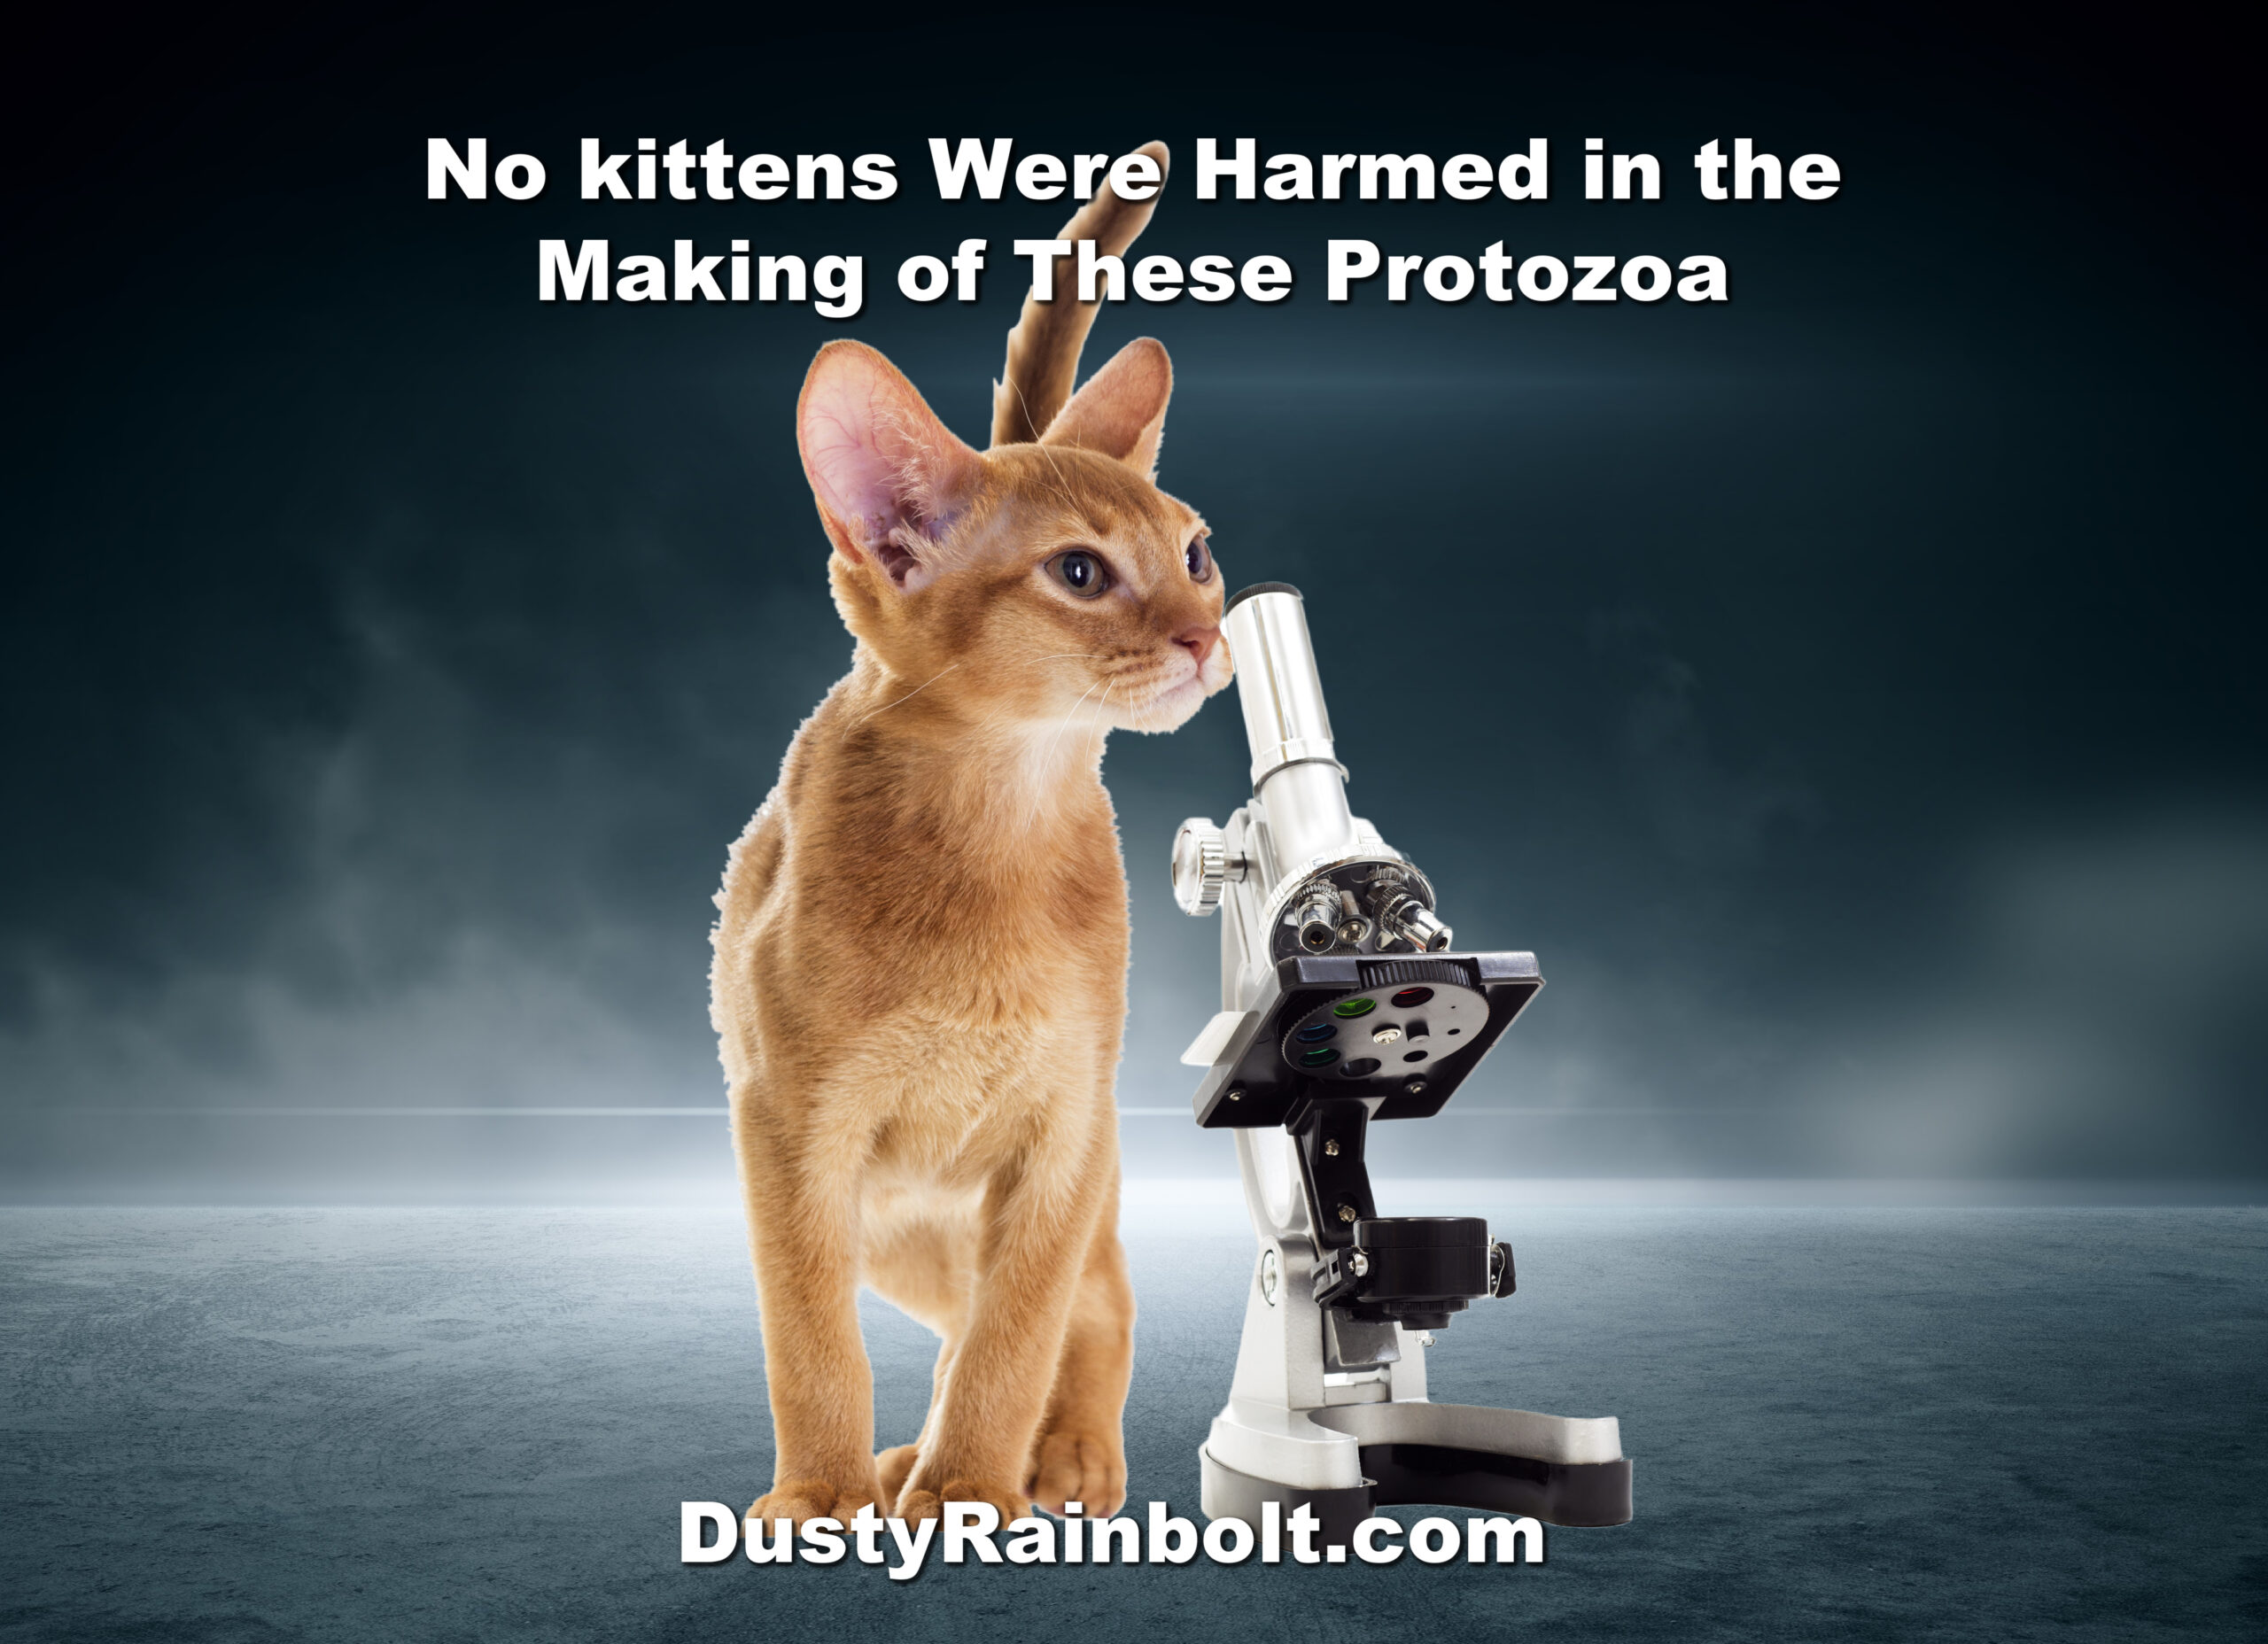 Toxoplasmosis Research: No Kittens Were Harmed in the Making of This Protozoa